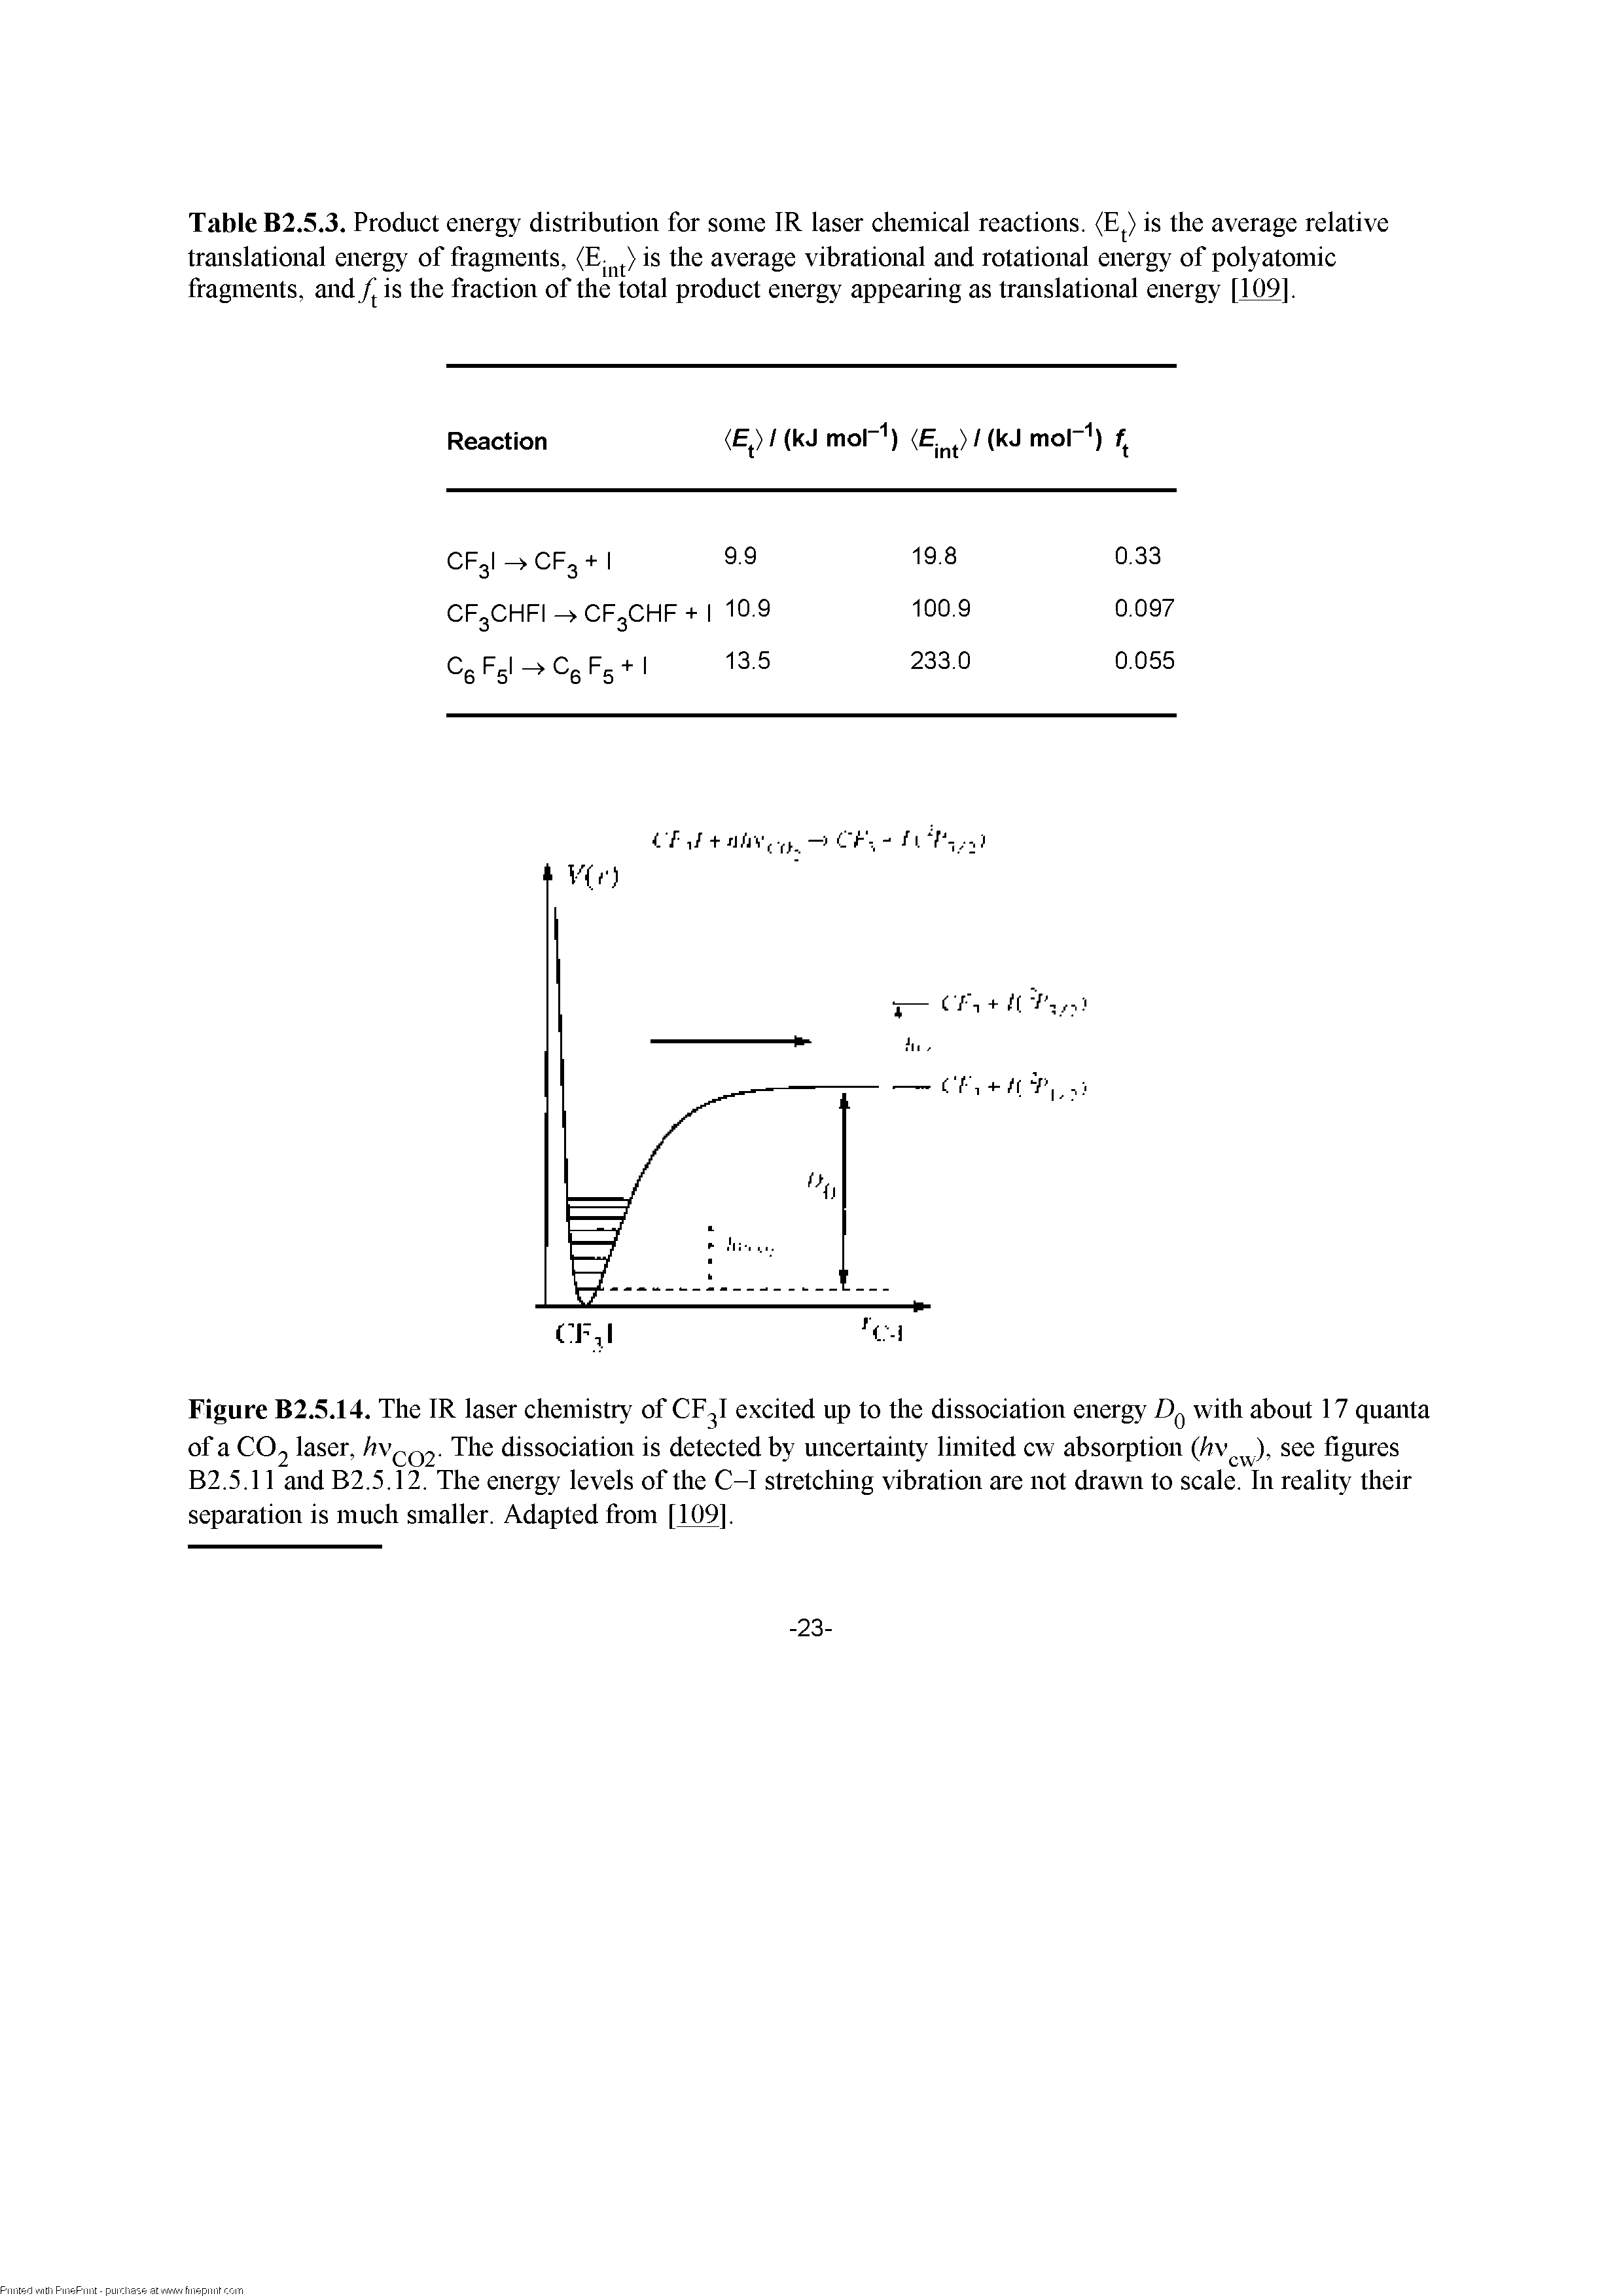 Table B2.5.3. Product energy distribution for some IR laser chemical reactions. (E ) is the average relative translational energy of fragments, is the average vibrational and rotational energy of polyatomic fragments, and/ is the fraction of the total product energy appearing as translational energy [109],...